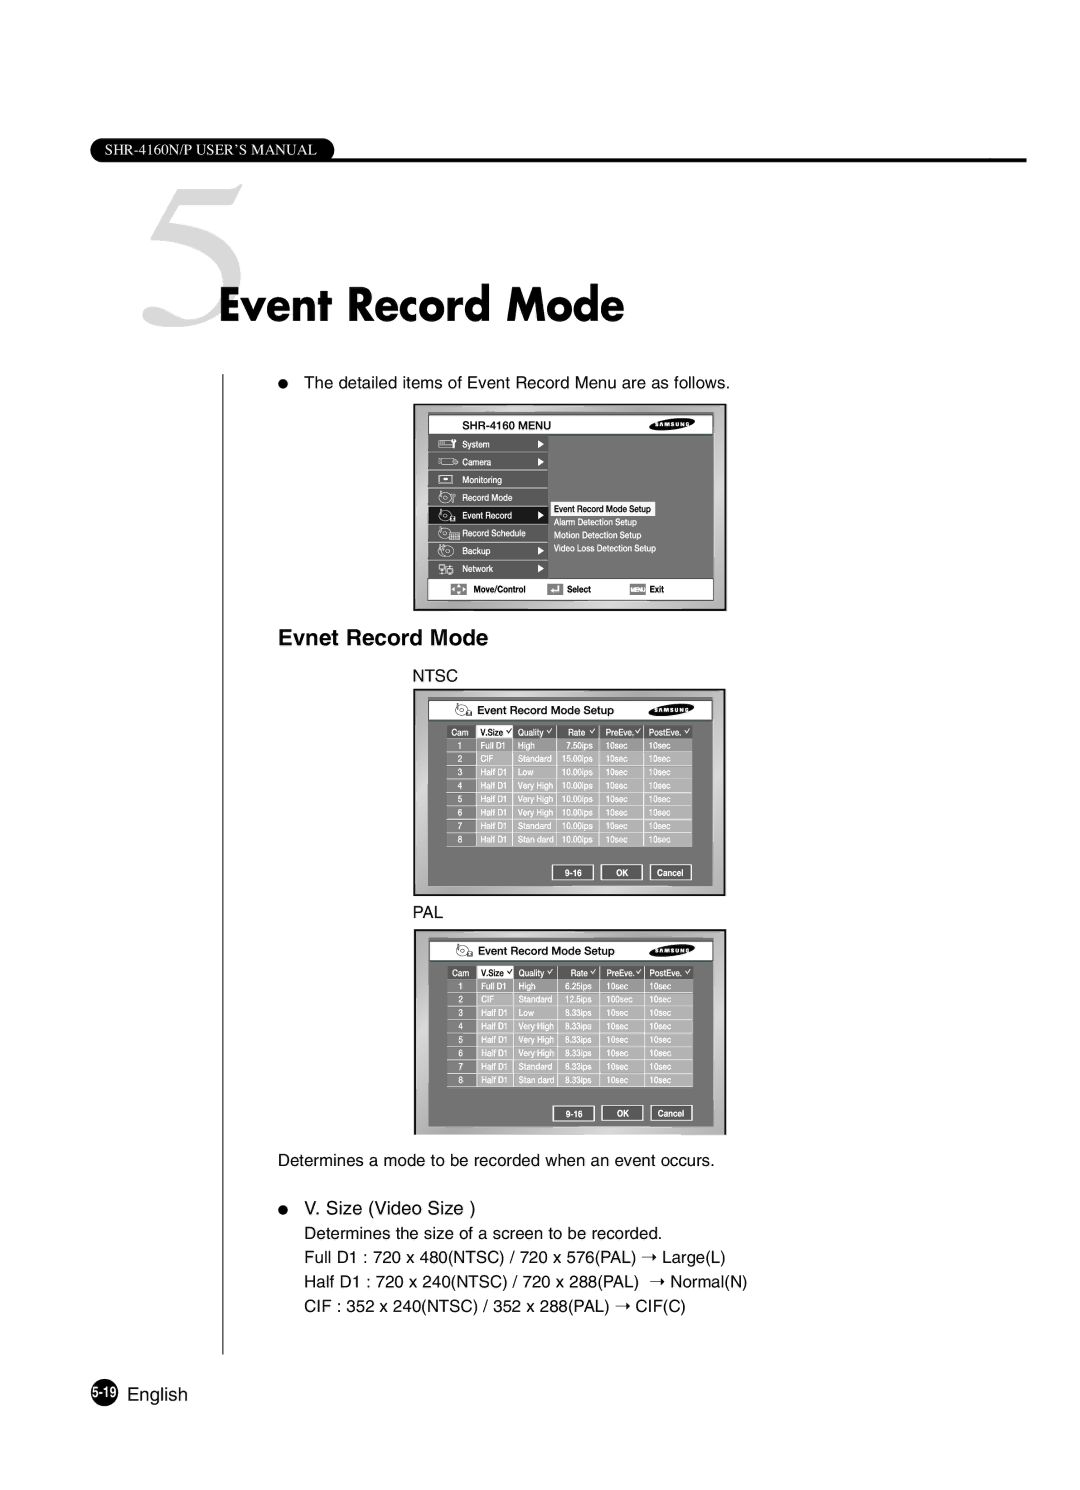 Samsung SHR-4160P manual 5Event Record Mode, Evnet Record Mode, Size Video Size, 19English 